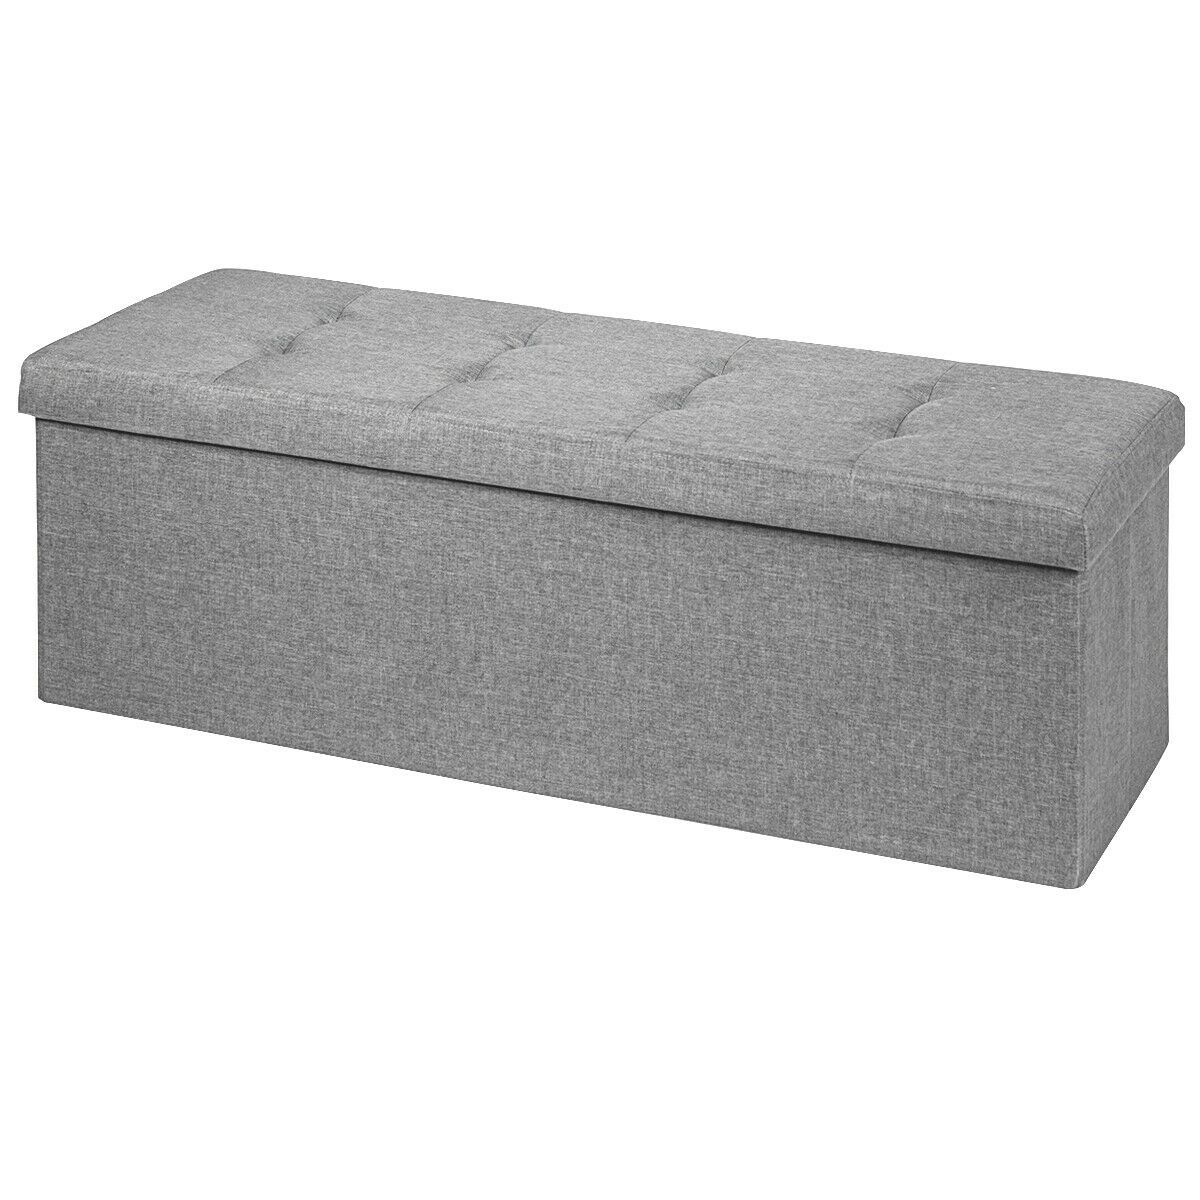 Folding Storage Ottoman Bench with Lid for Hallway or Bedroom - Silver